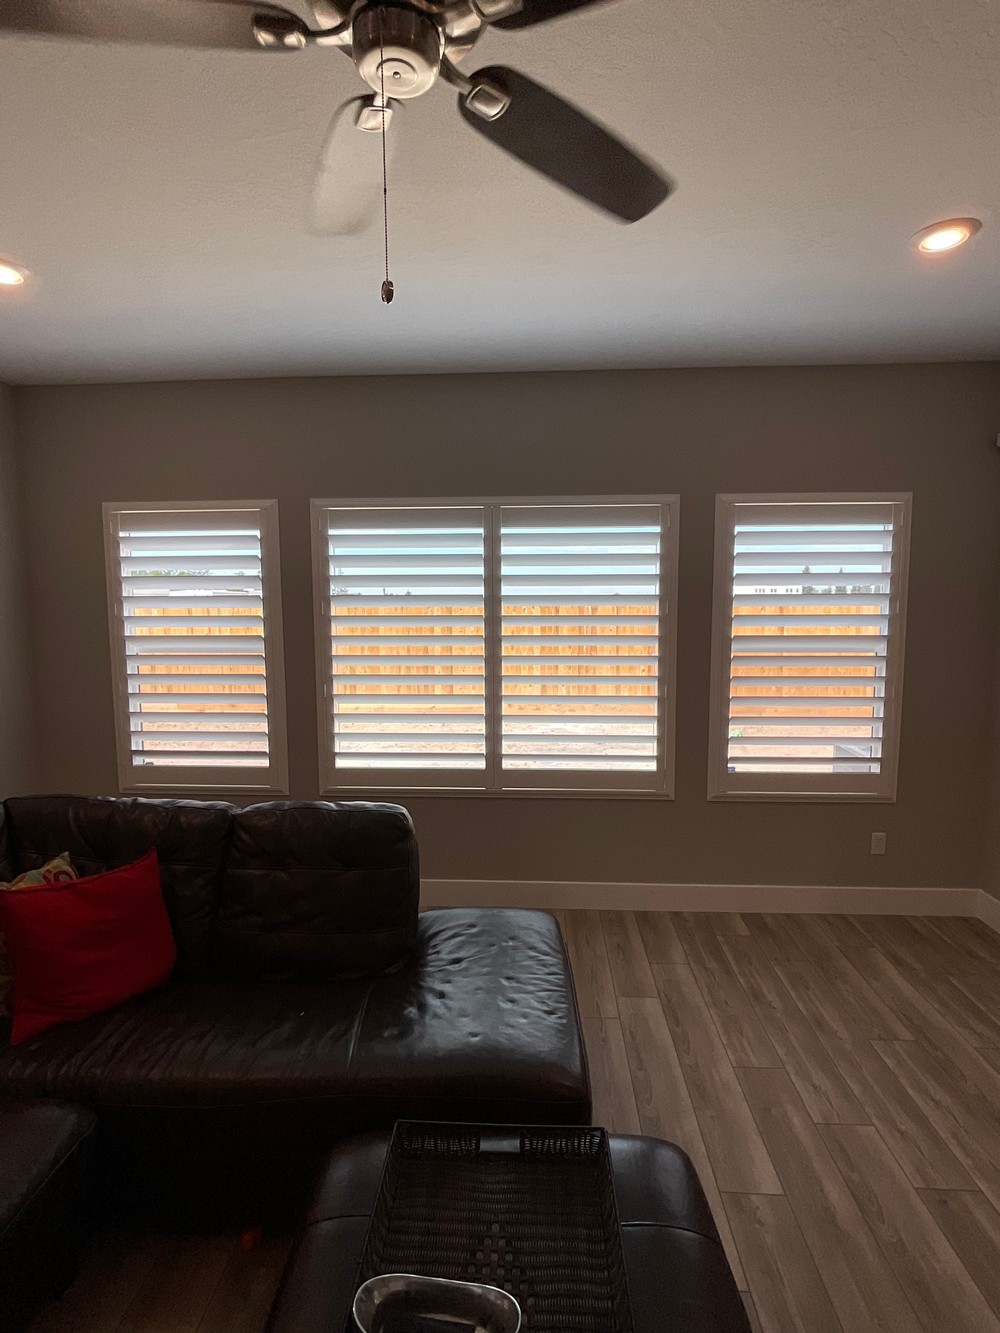 Motorized Shades, Shutters, and White Shutters in Clovis, CA